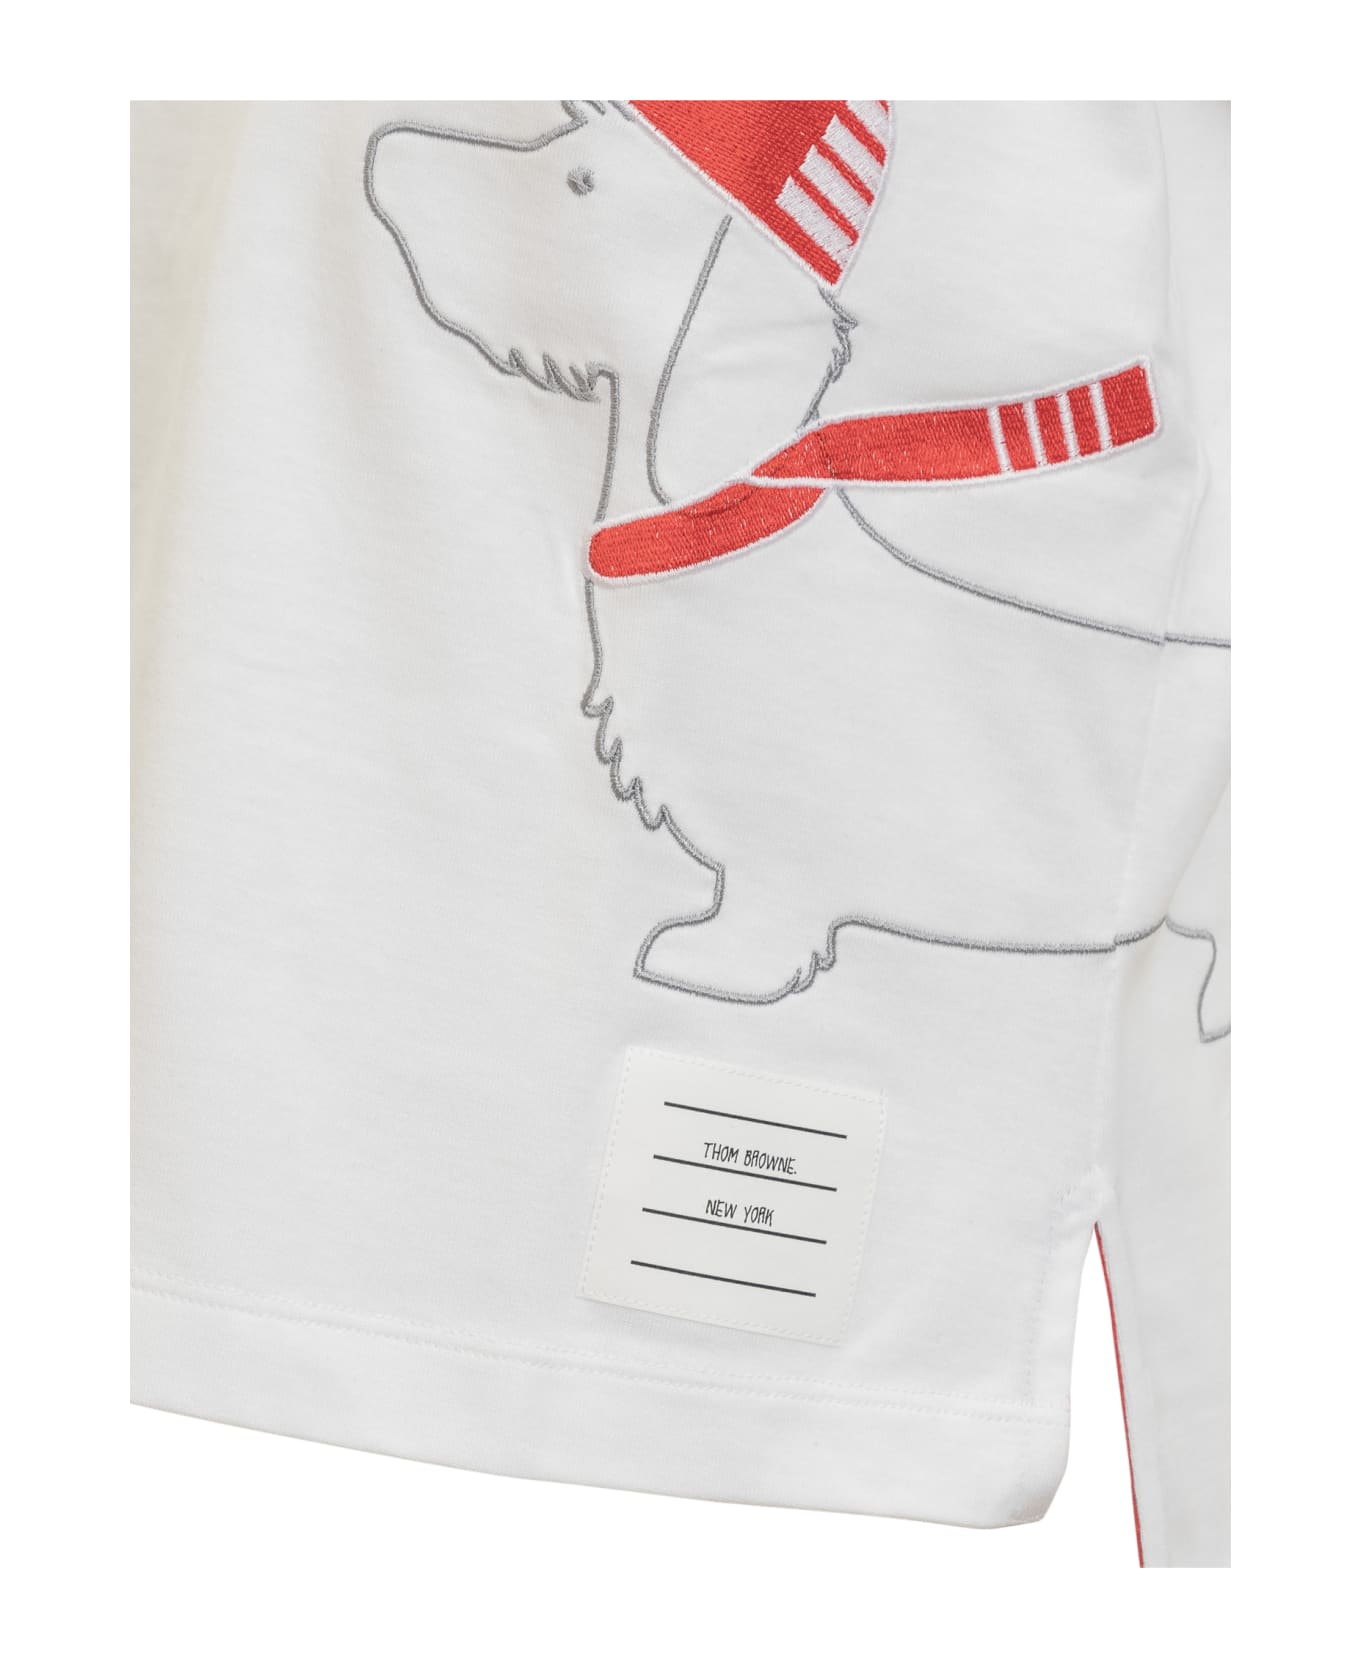 Thom Browne Hector T-shirt - WHITE